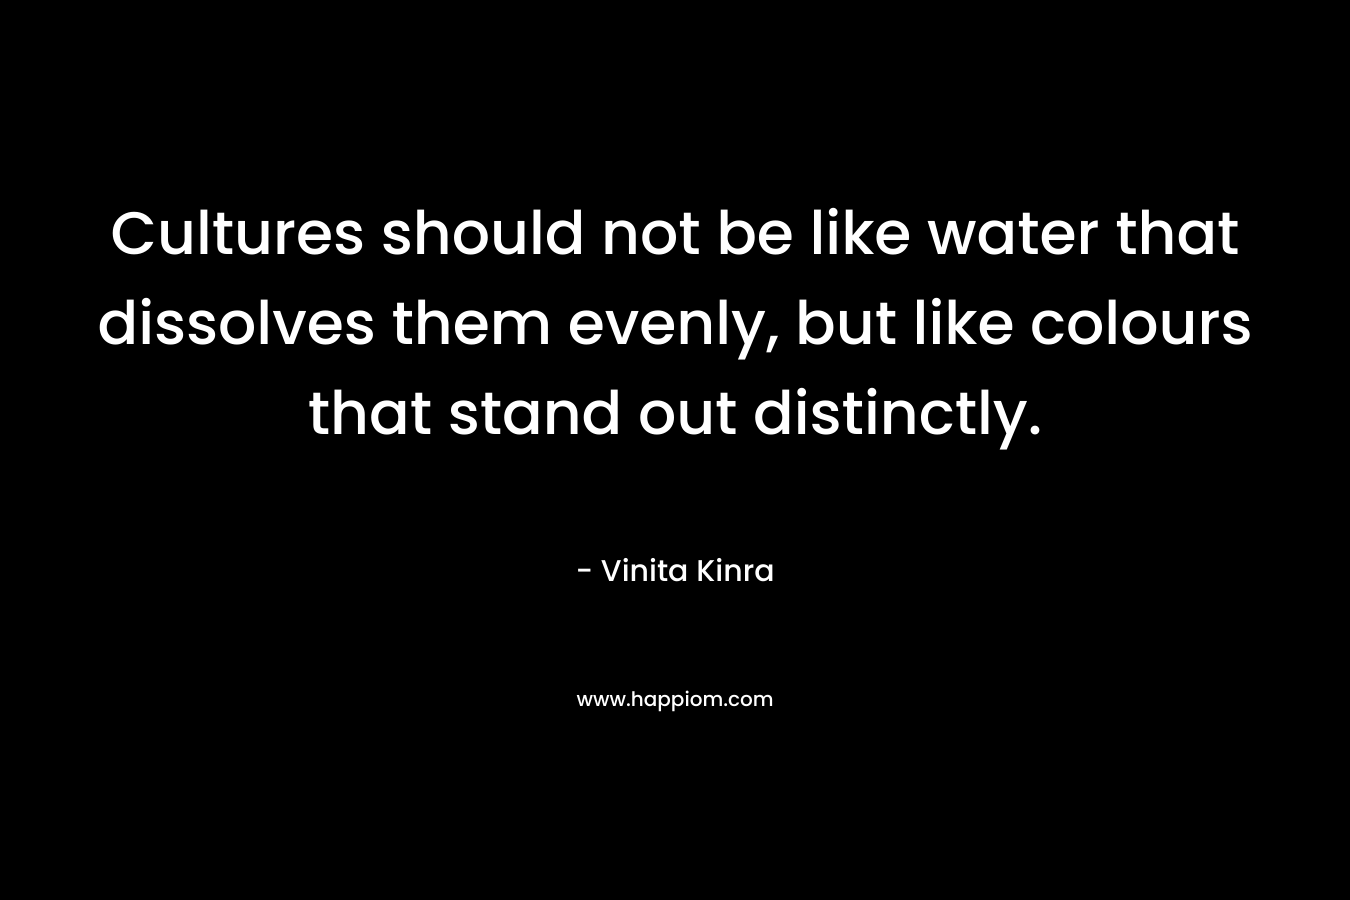 Cultures should not be like water that dissolves them evenly, but like colours that stand out distinctly. – Vinita Kinra